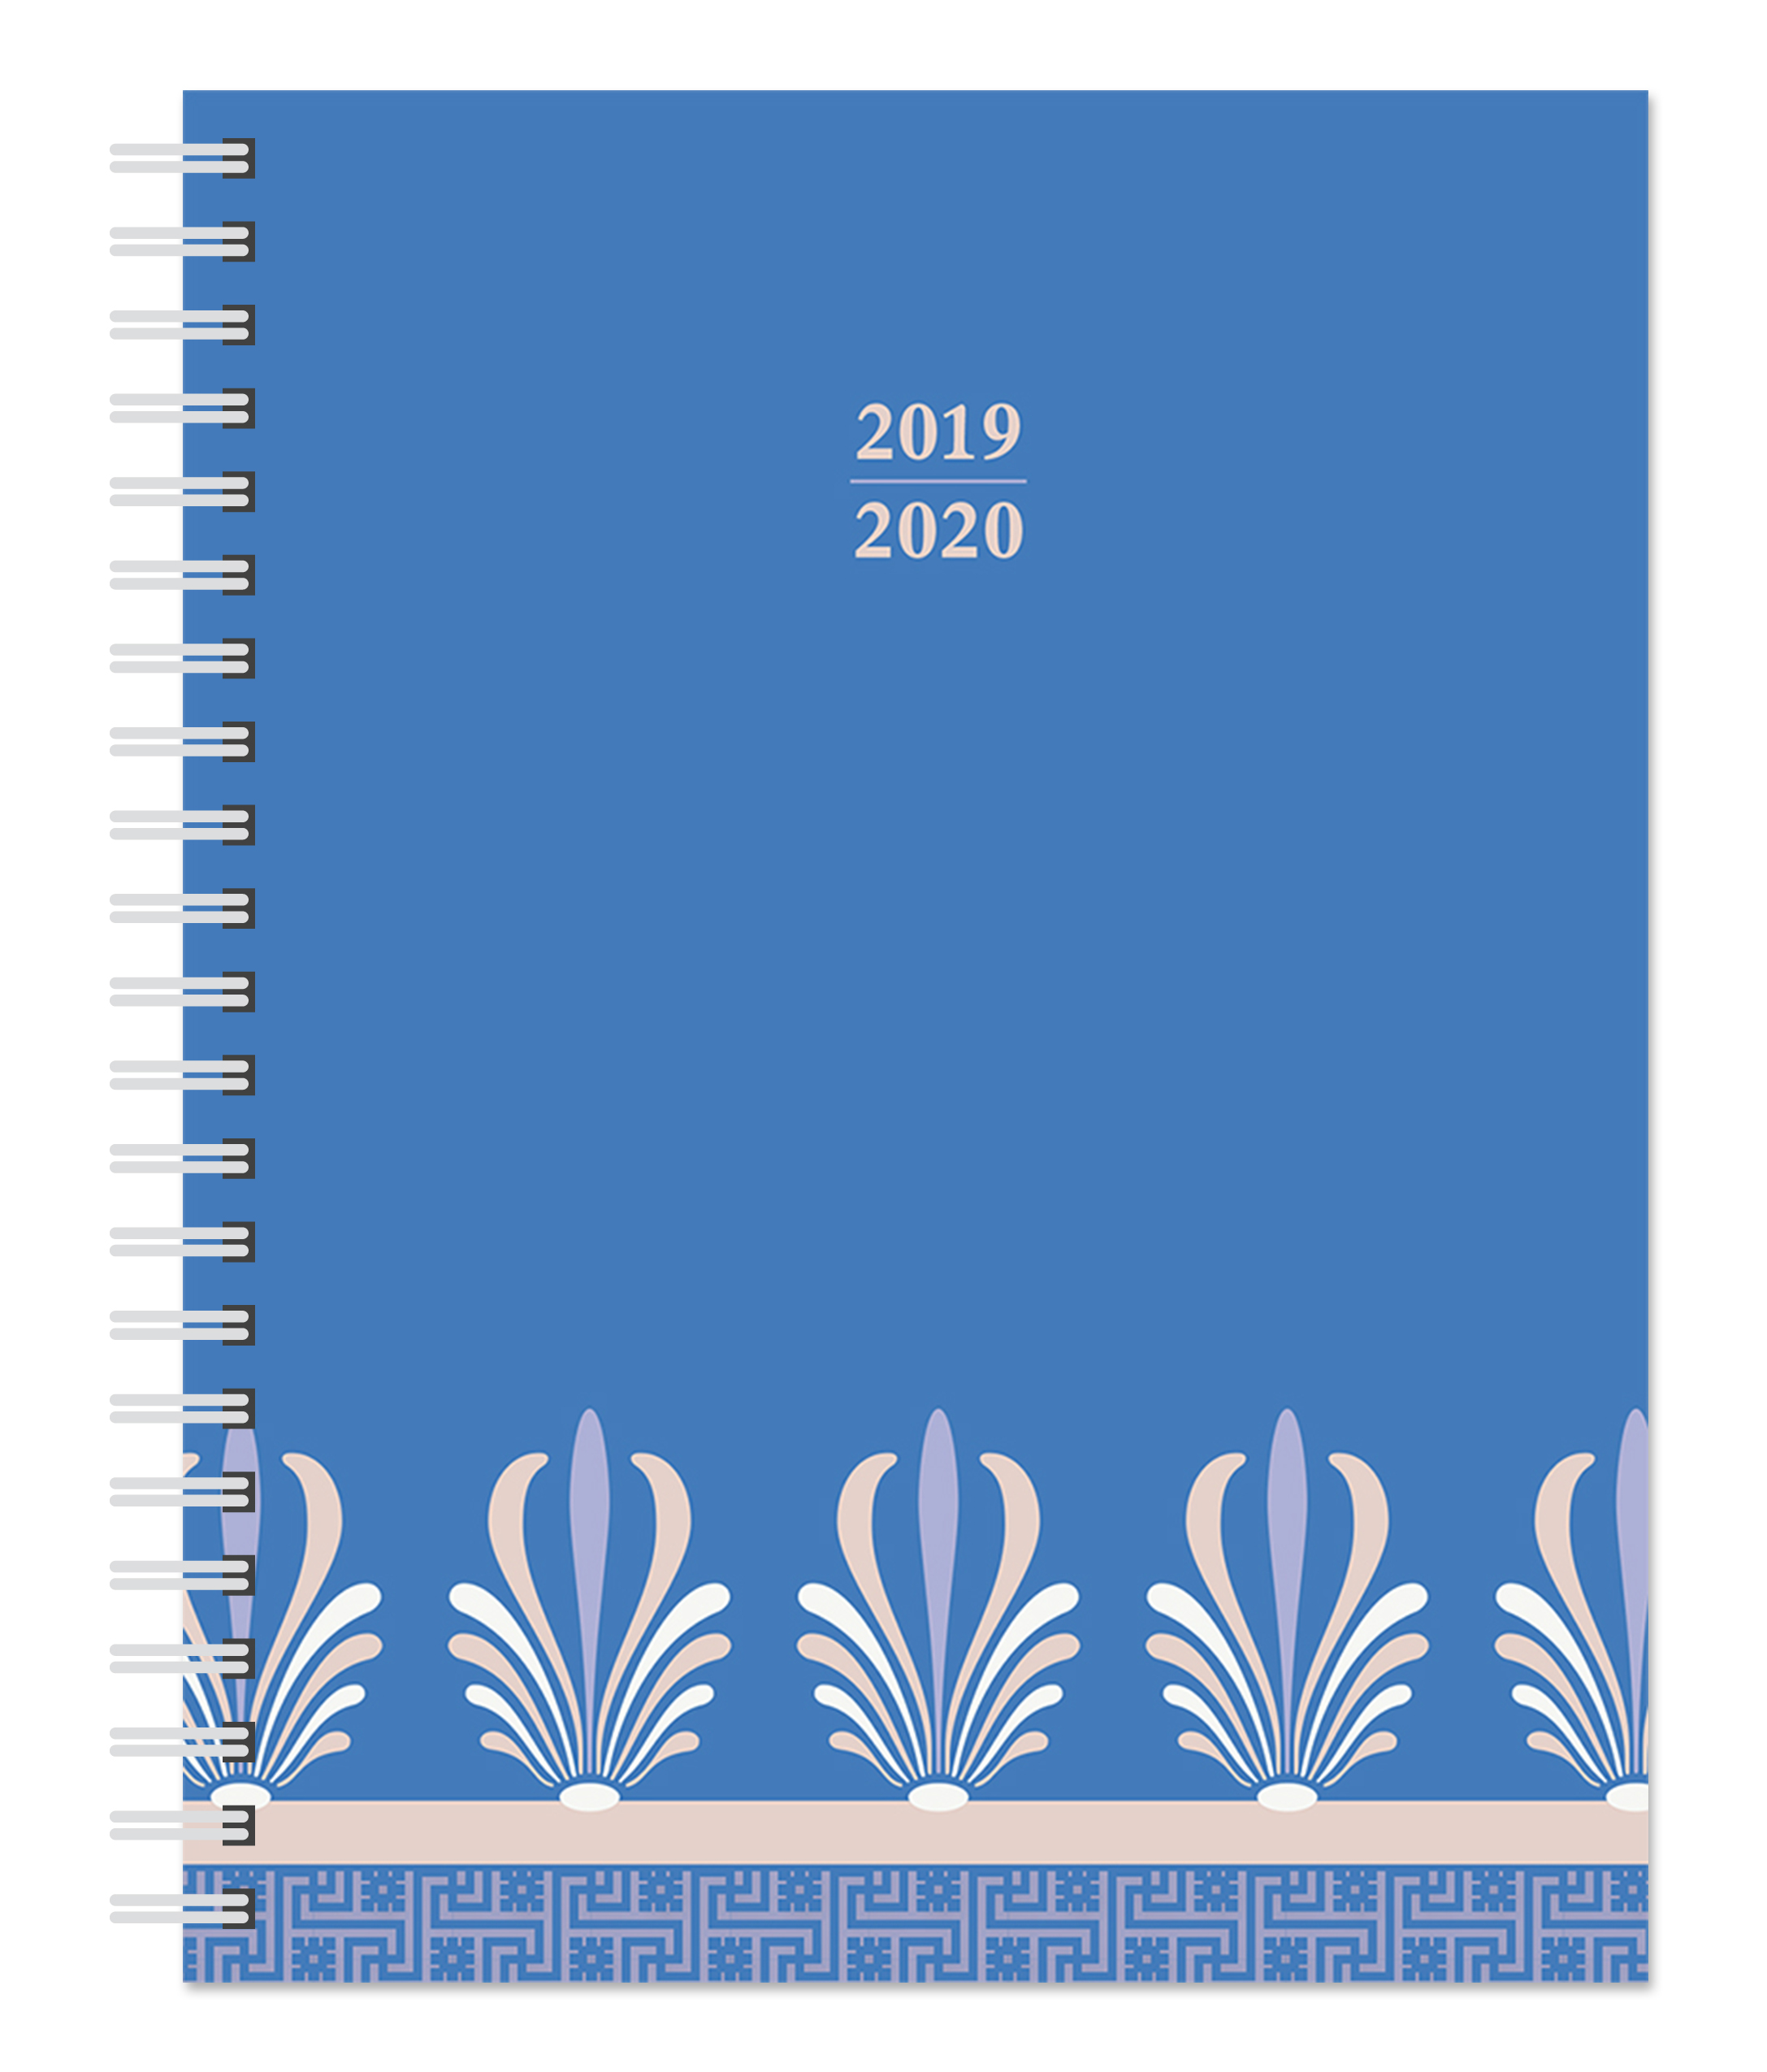 Ornamental Blue 2020 6 x 7.75 Inch Weekly 18 Months Desk Planner by Plato, Planning Stationery